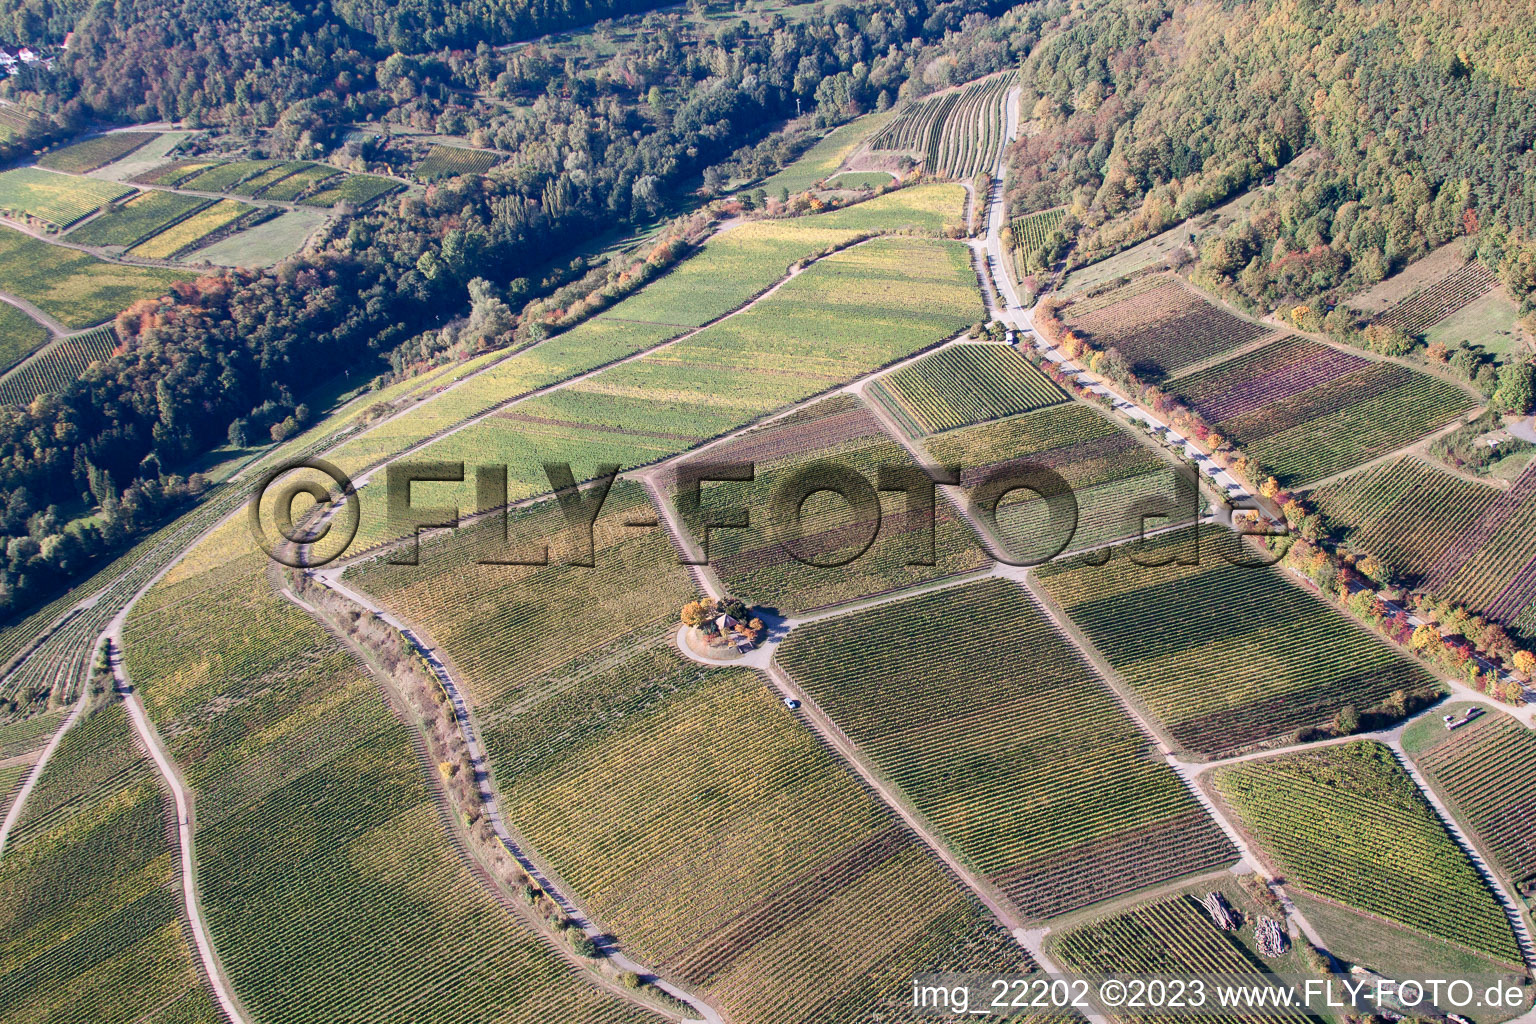 Aerial photograpy of Weyher in der Pfalz in the state Rhineland-Palatinate, Germany